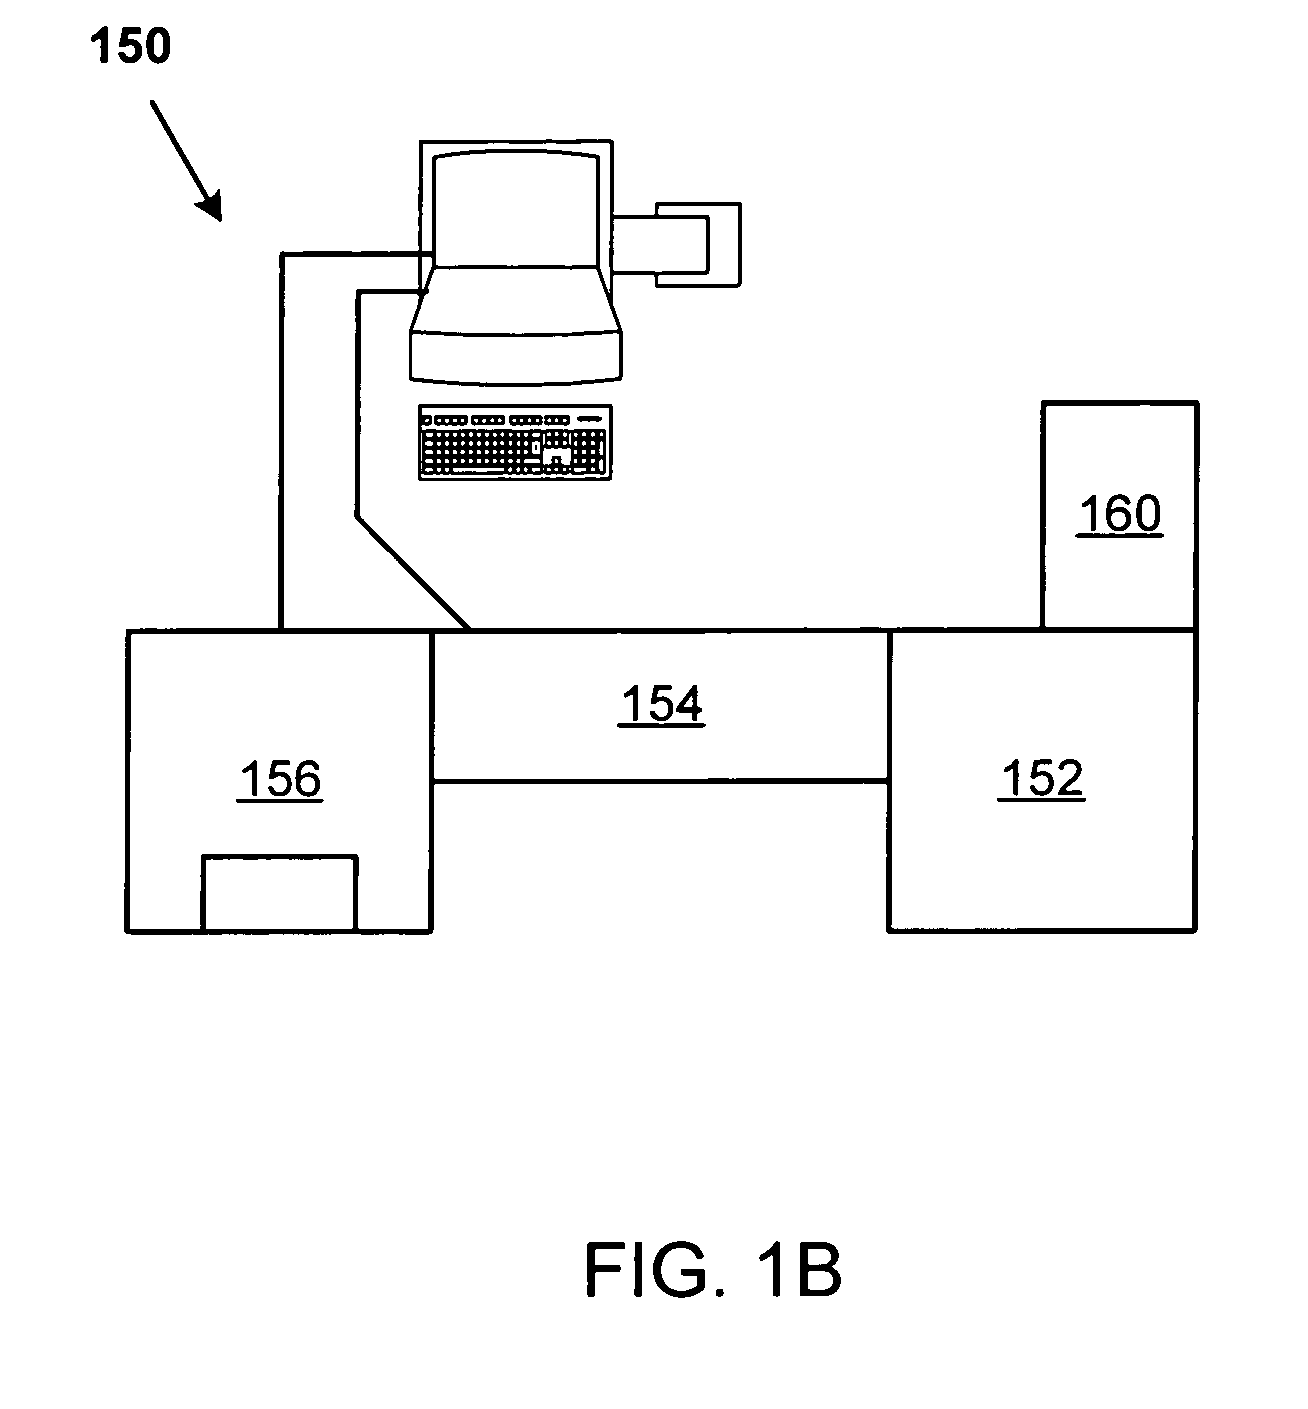 Card reading systems and methods